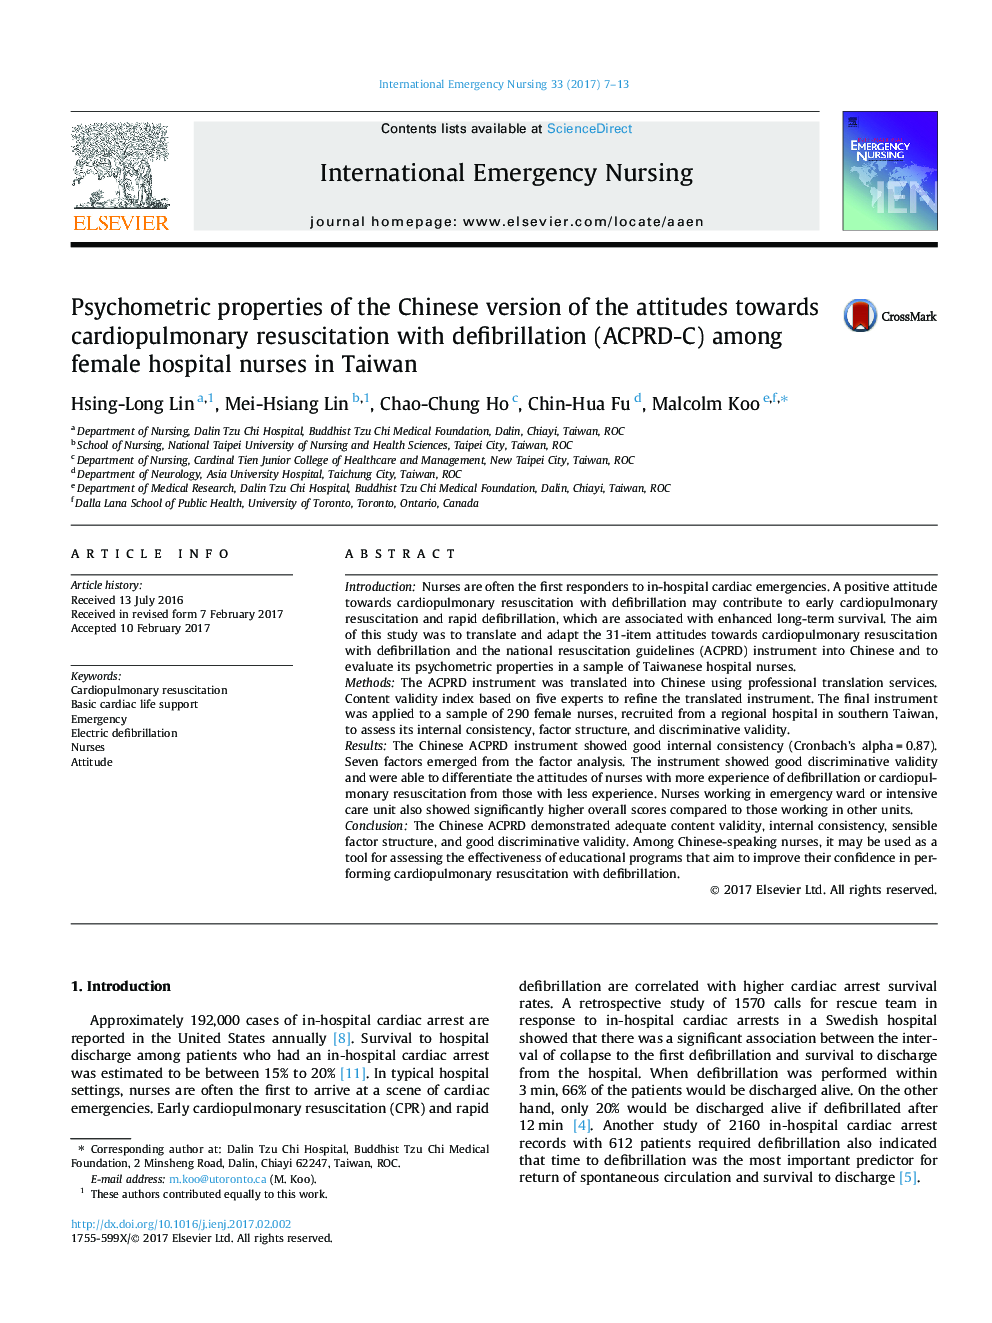 Psychometric properties of the Chinese version of the attitudes towards cardiopulmonary resuscitation with defibrillation (ACPRD-C) among female hospital nurses in Taiwan